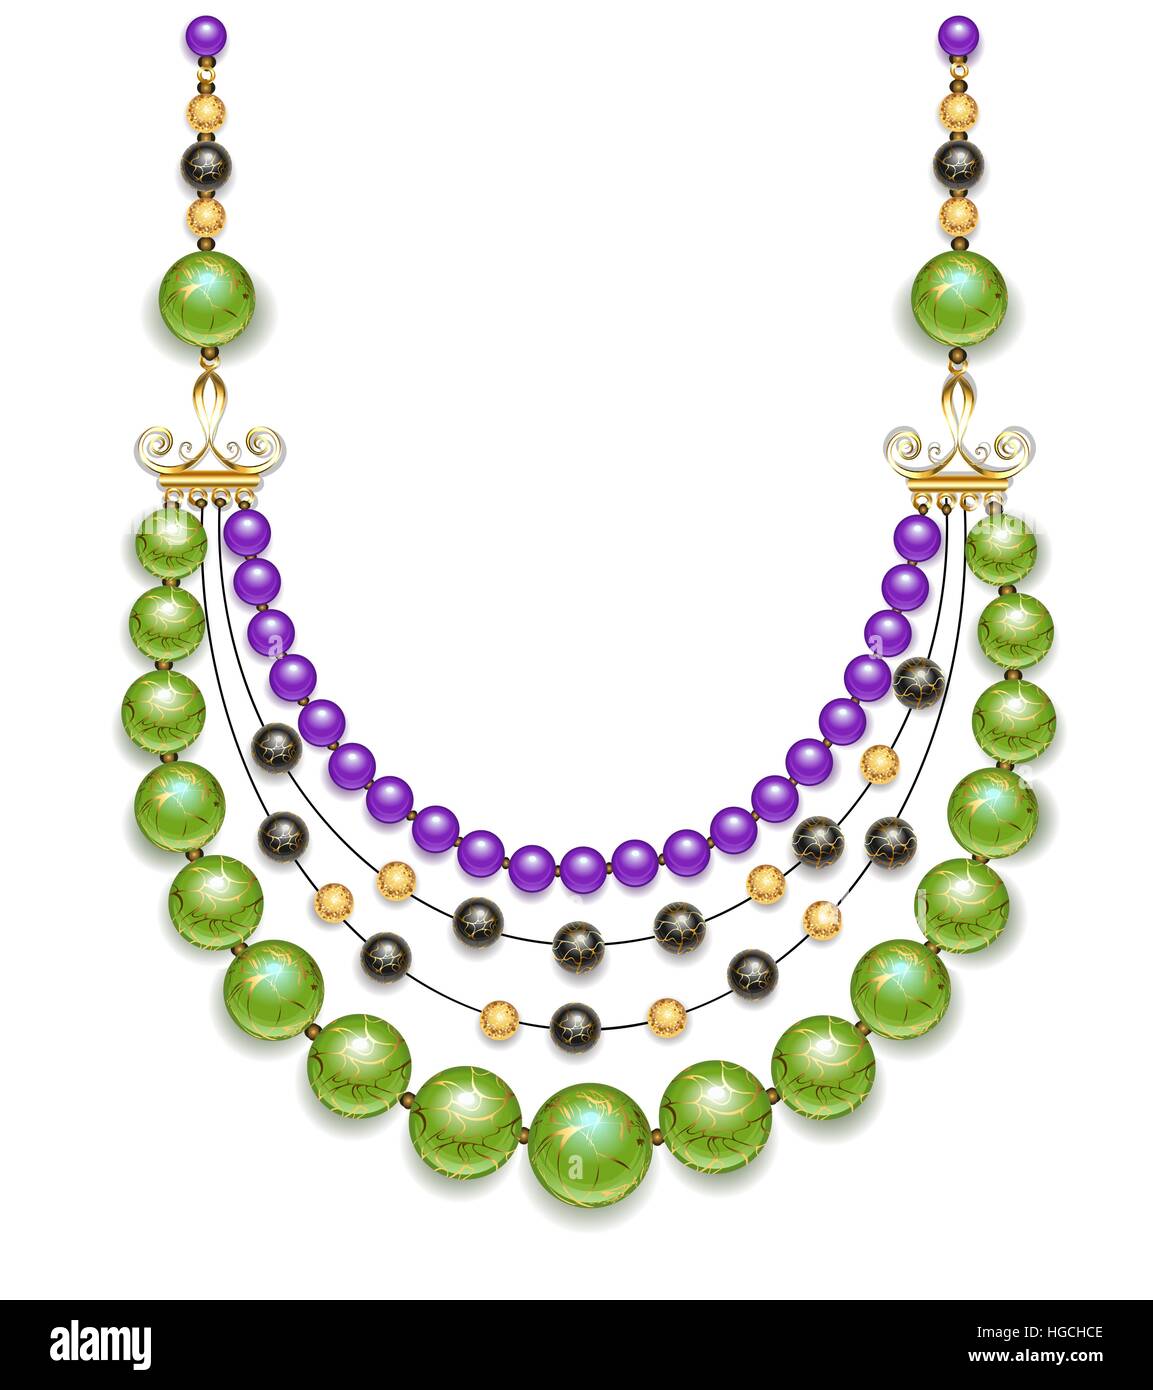 Necklace of green, black and purple fashion beads on a white background. Trendy Greenery. Design jewelry. Stock Vector